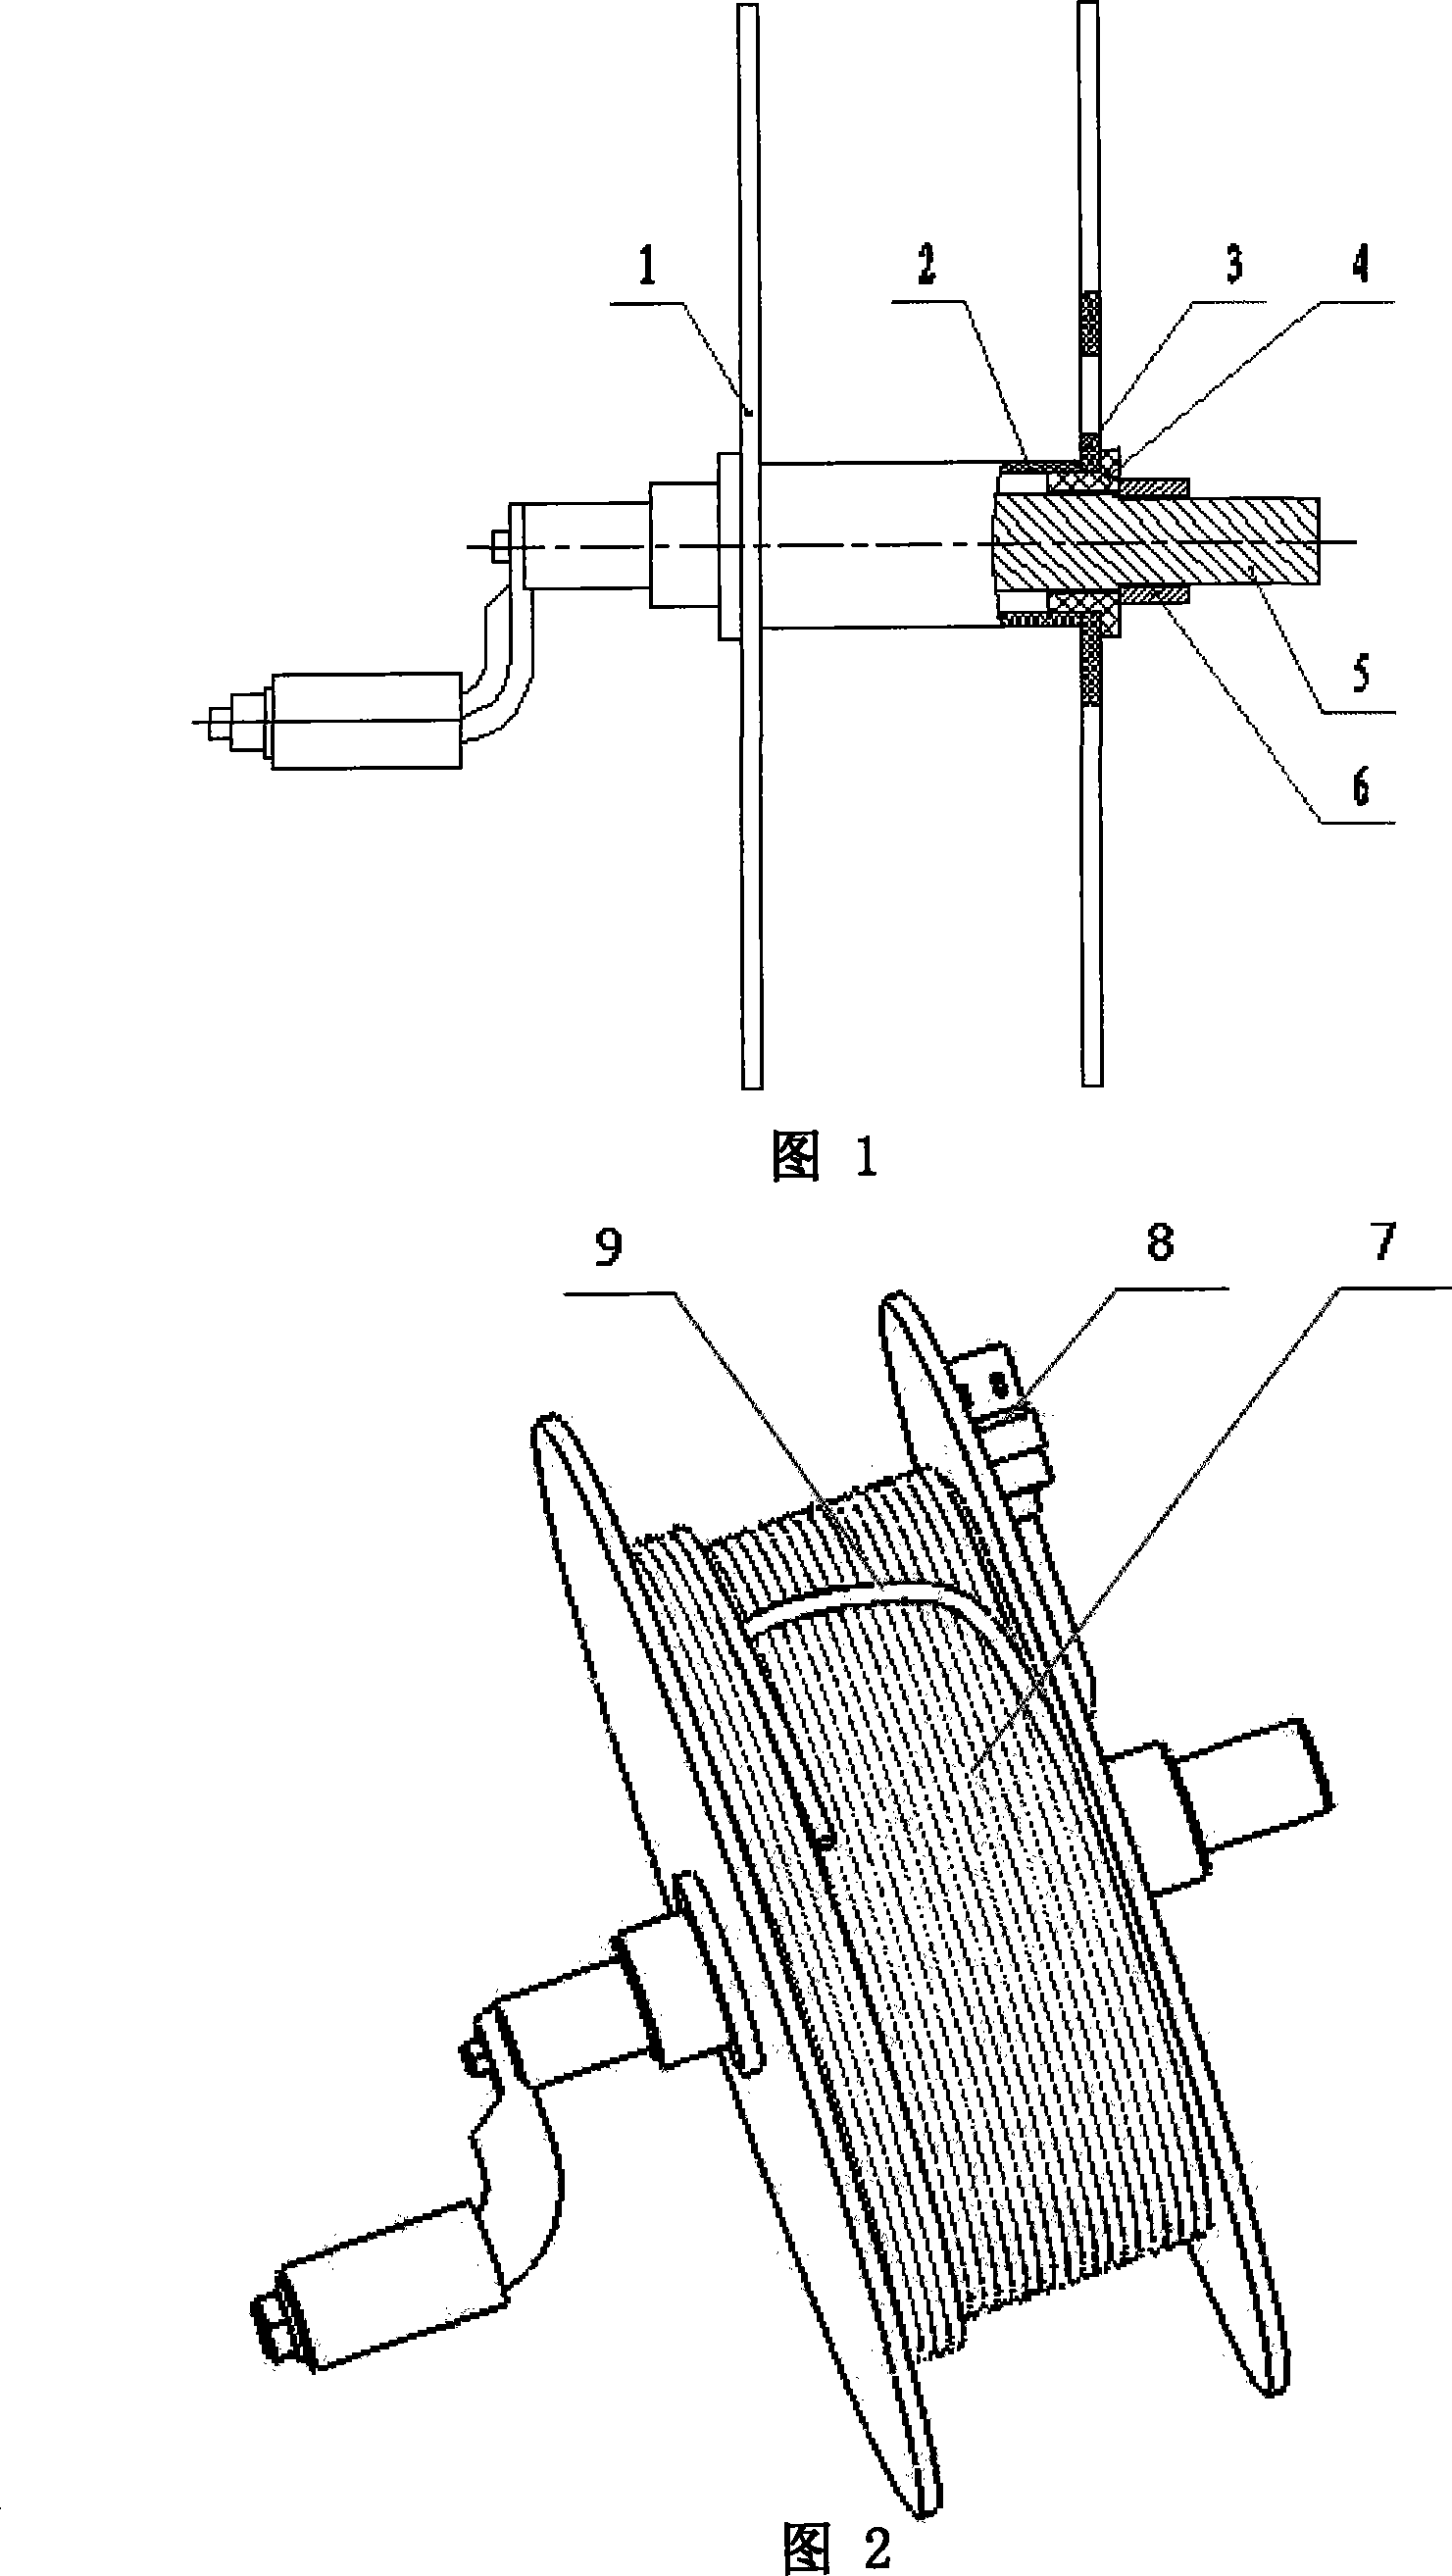 Moorage rope twisting elimination coiling assembly method